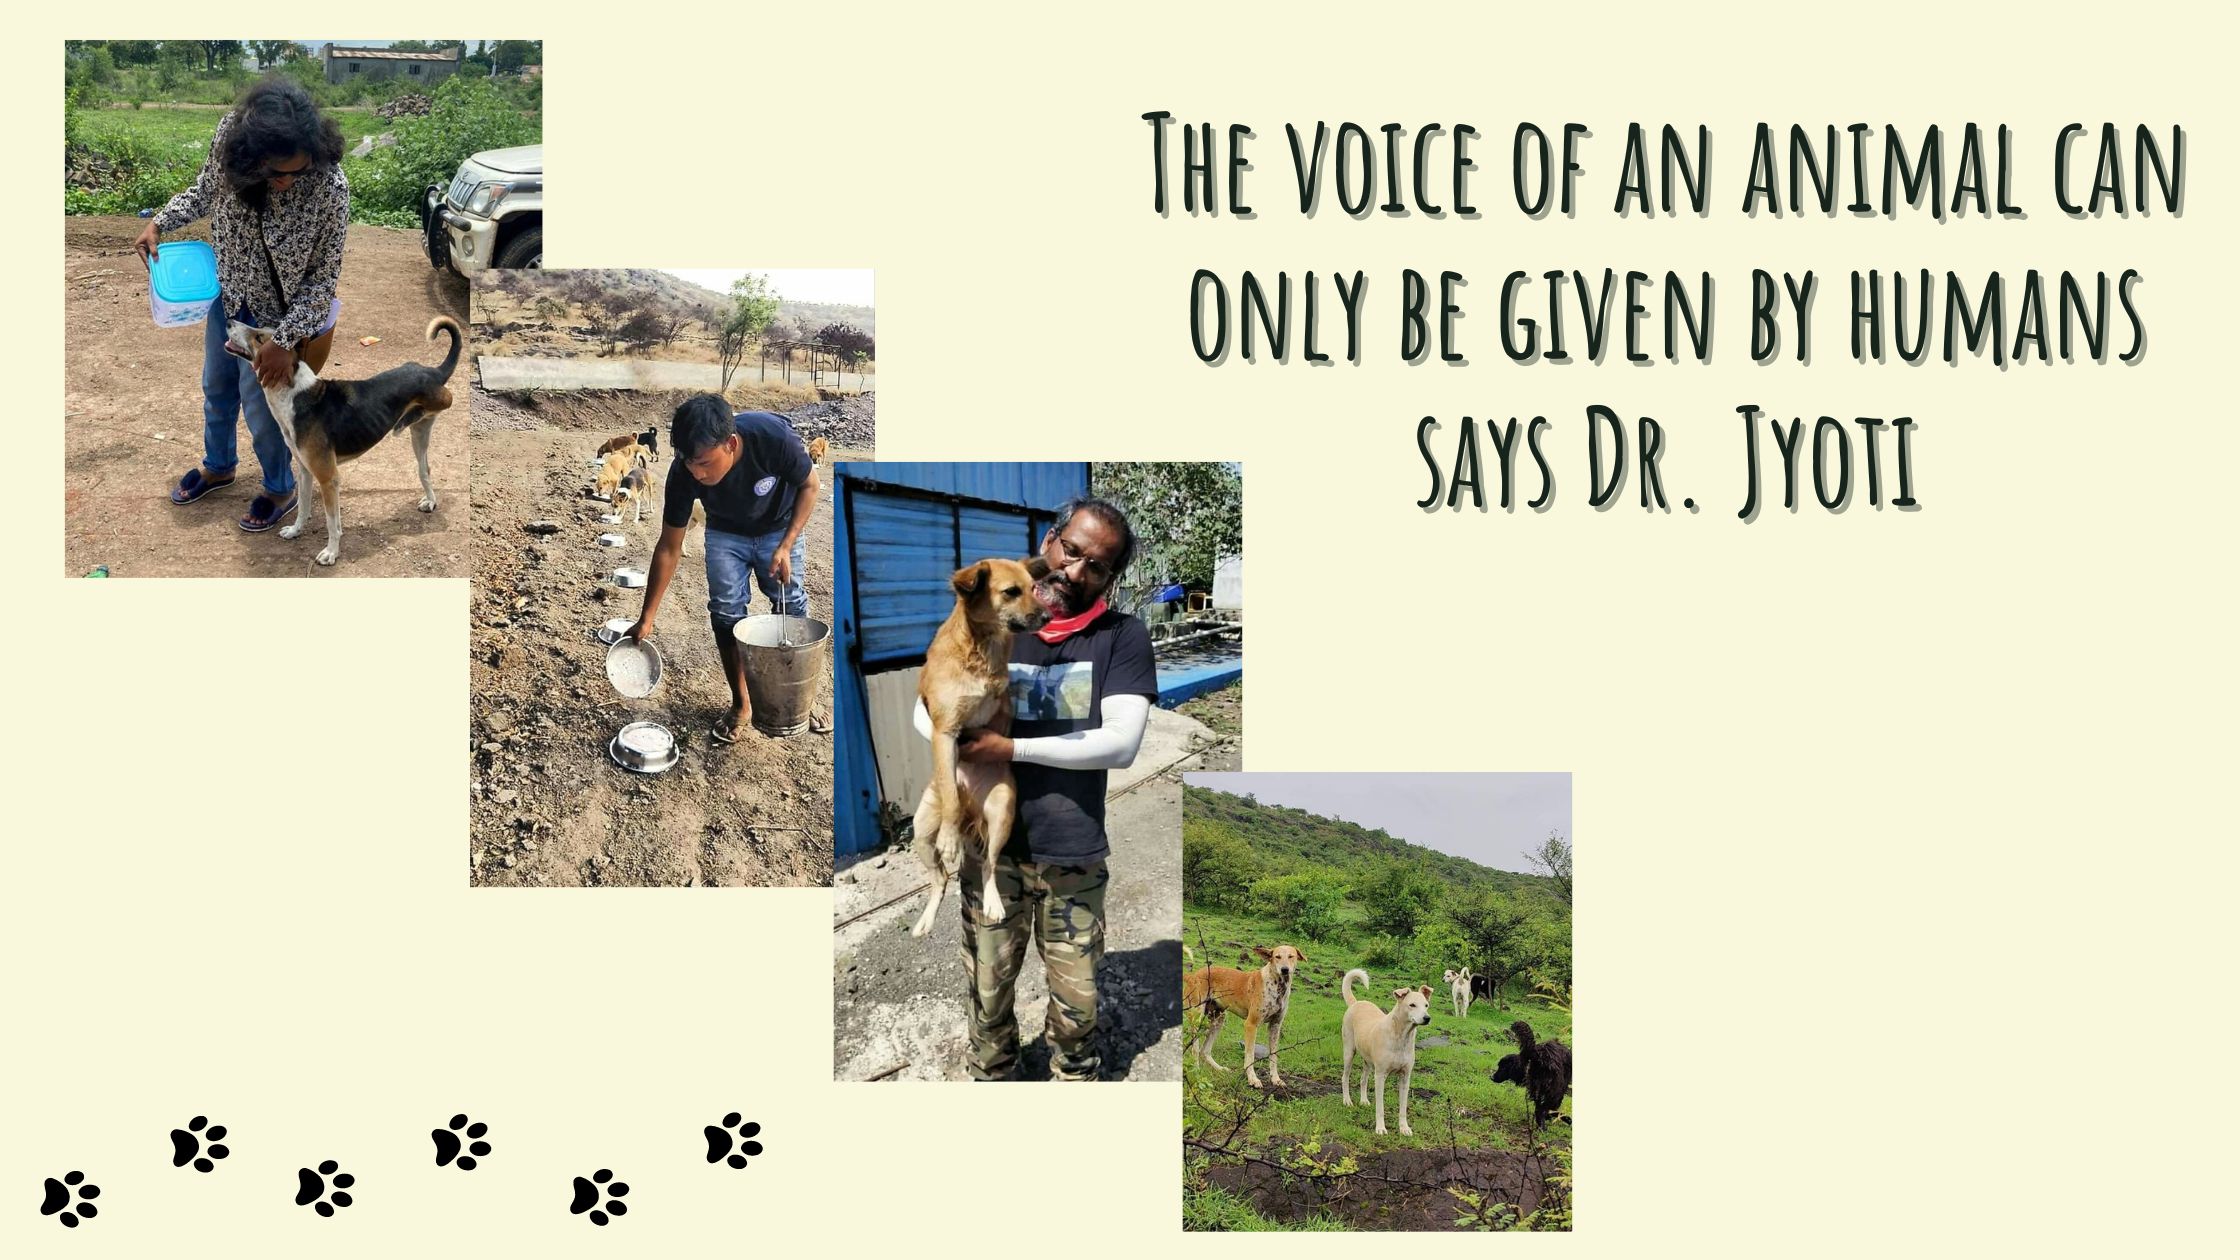 The voice of an animal can only be given by humans says Dr. Jyoti